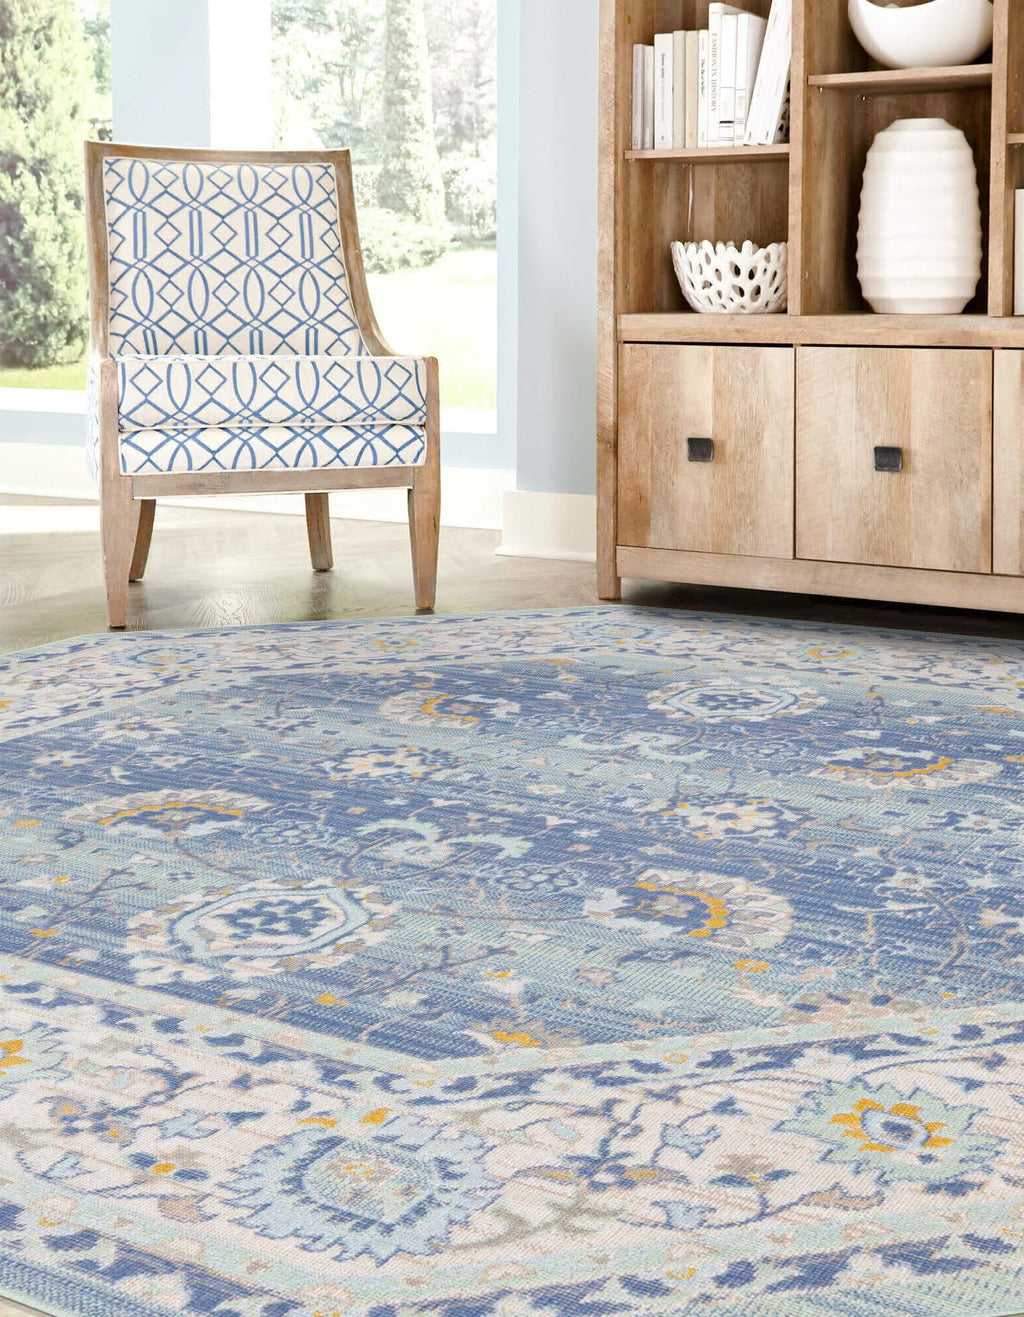 Unique Loom Whitney T-WHIT3 French Blue Area Rug Octagon Lifestyle Image Feature